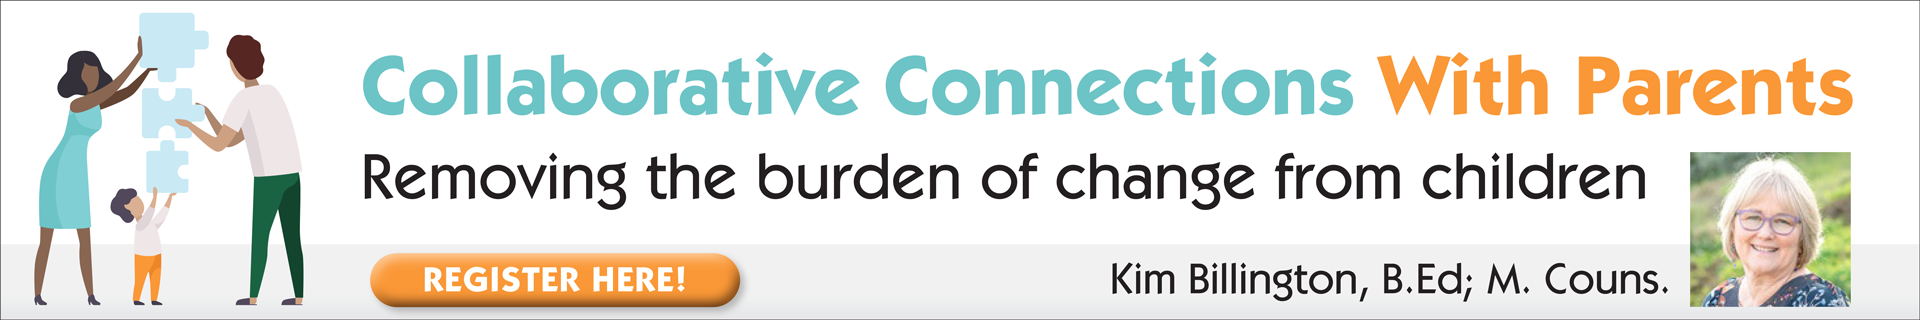 COLLABORATIVE CONNECTIONS WITH  PARENTS: Removing the burden of change from children.